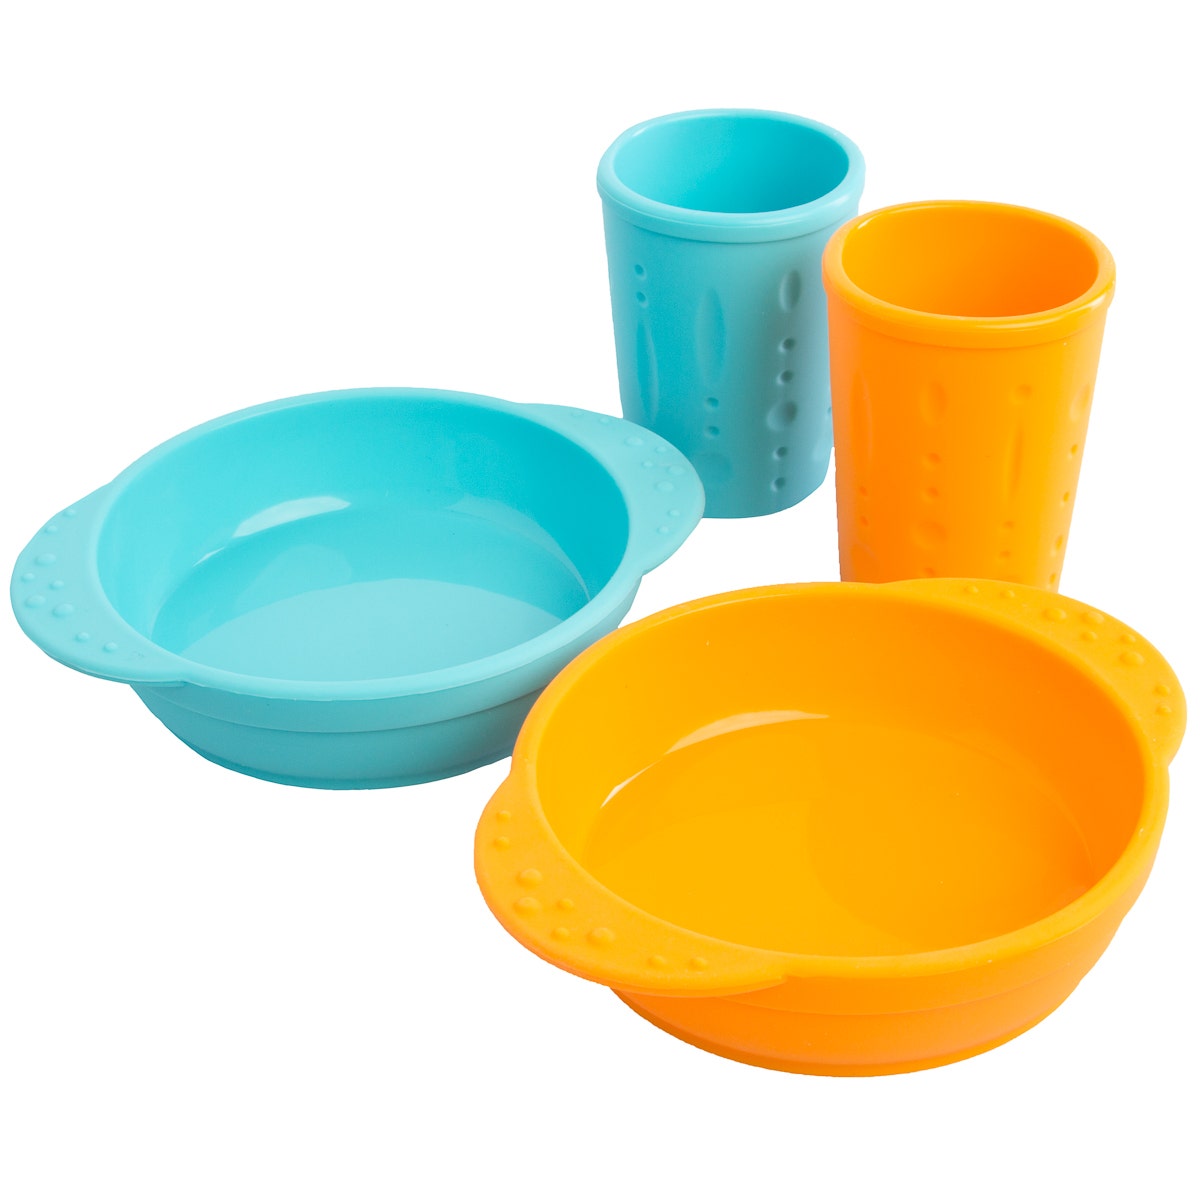 4pc Kinderville Kids Easy Grip Silicone Cups & Bowls Set